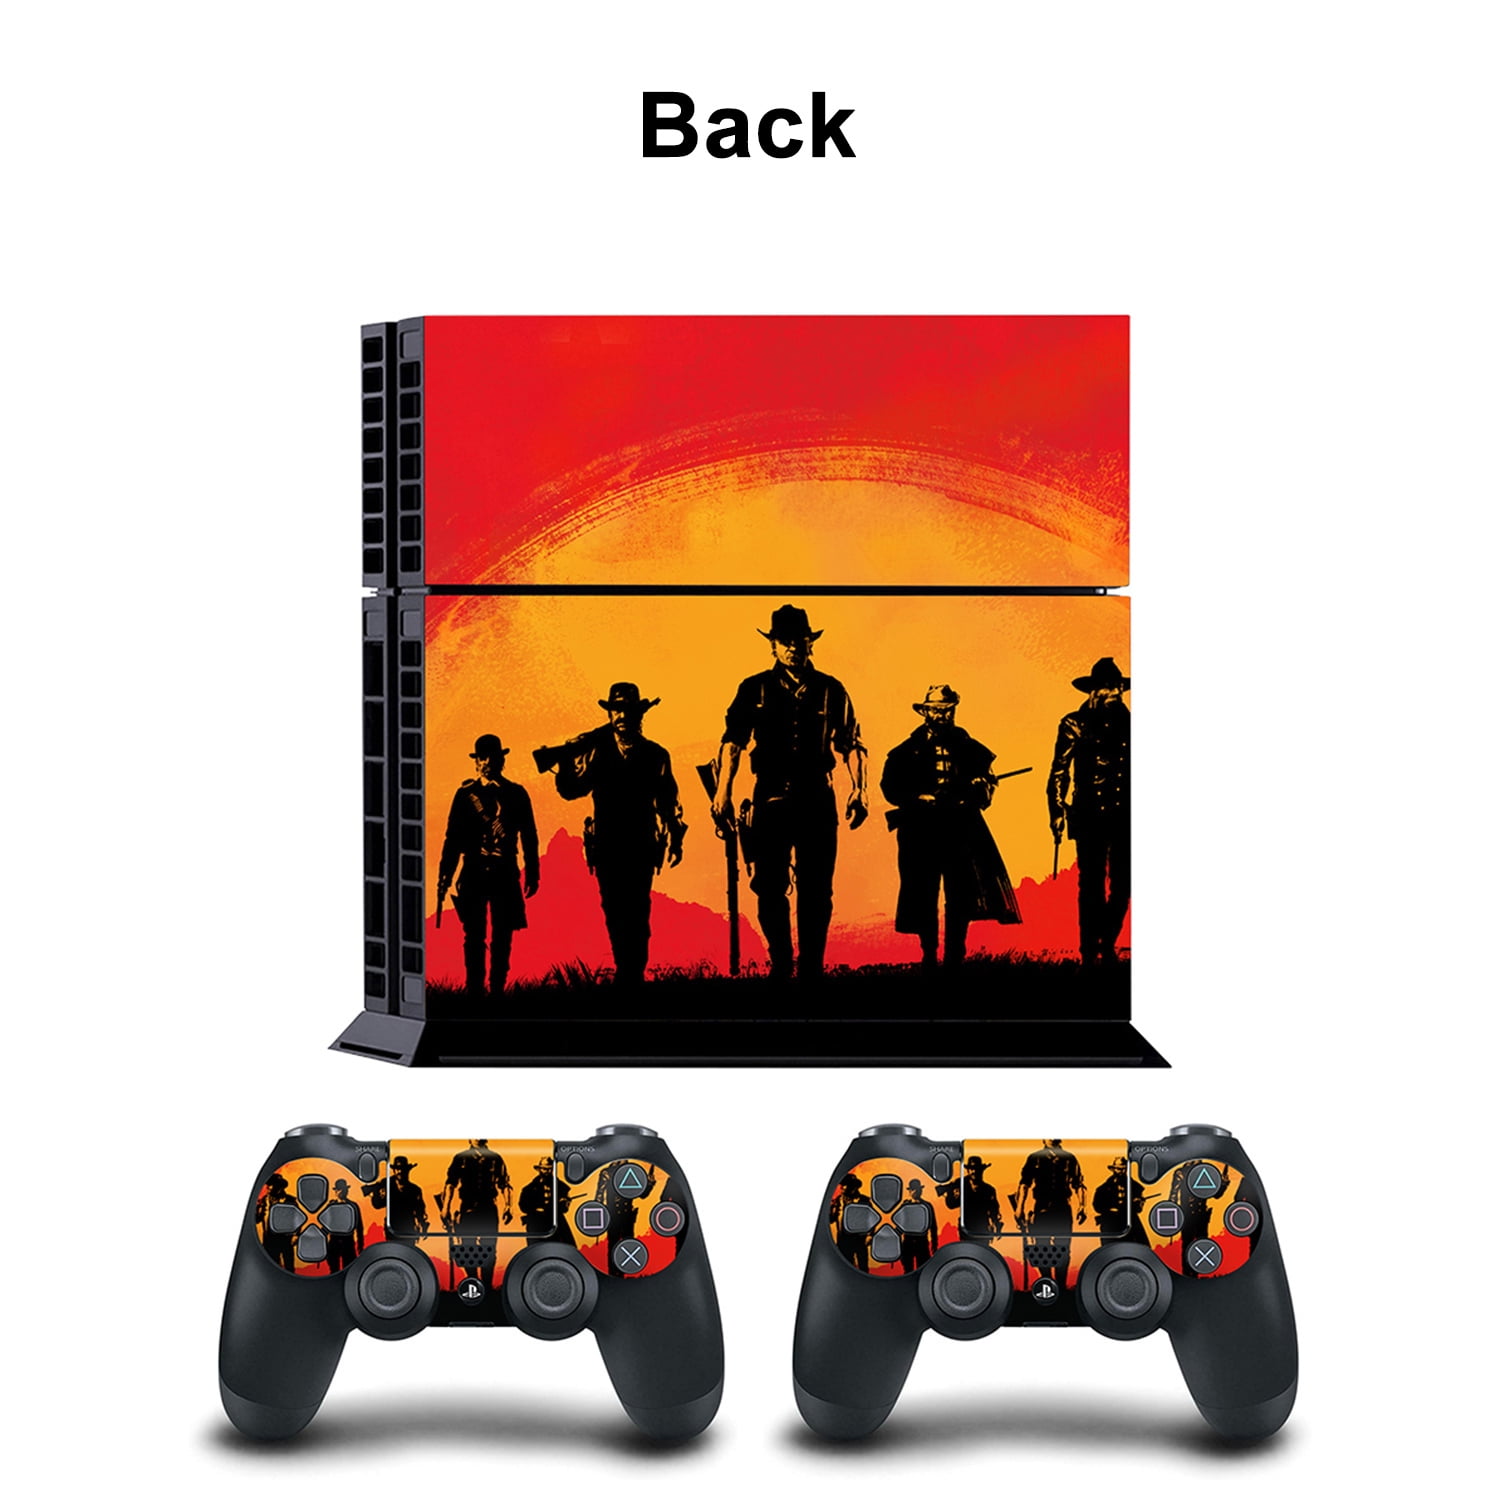 GameXcel Vinyl Decal Protective Cover Wrap Sticker vinilo Calcomanía for  Sony PS5 Disk Console and Wireless Controller(The Witcher 3 Wild Hunt) 